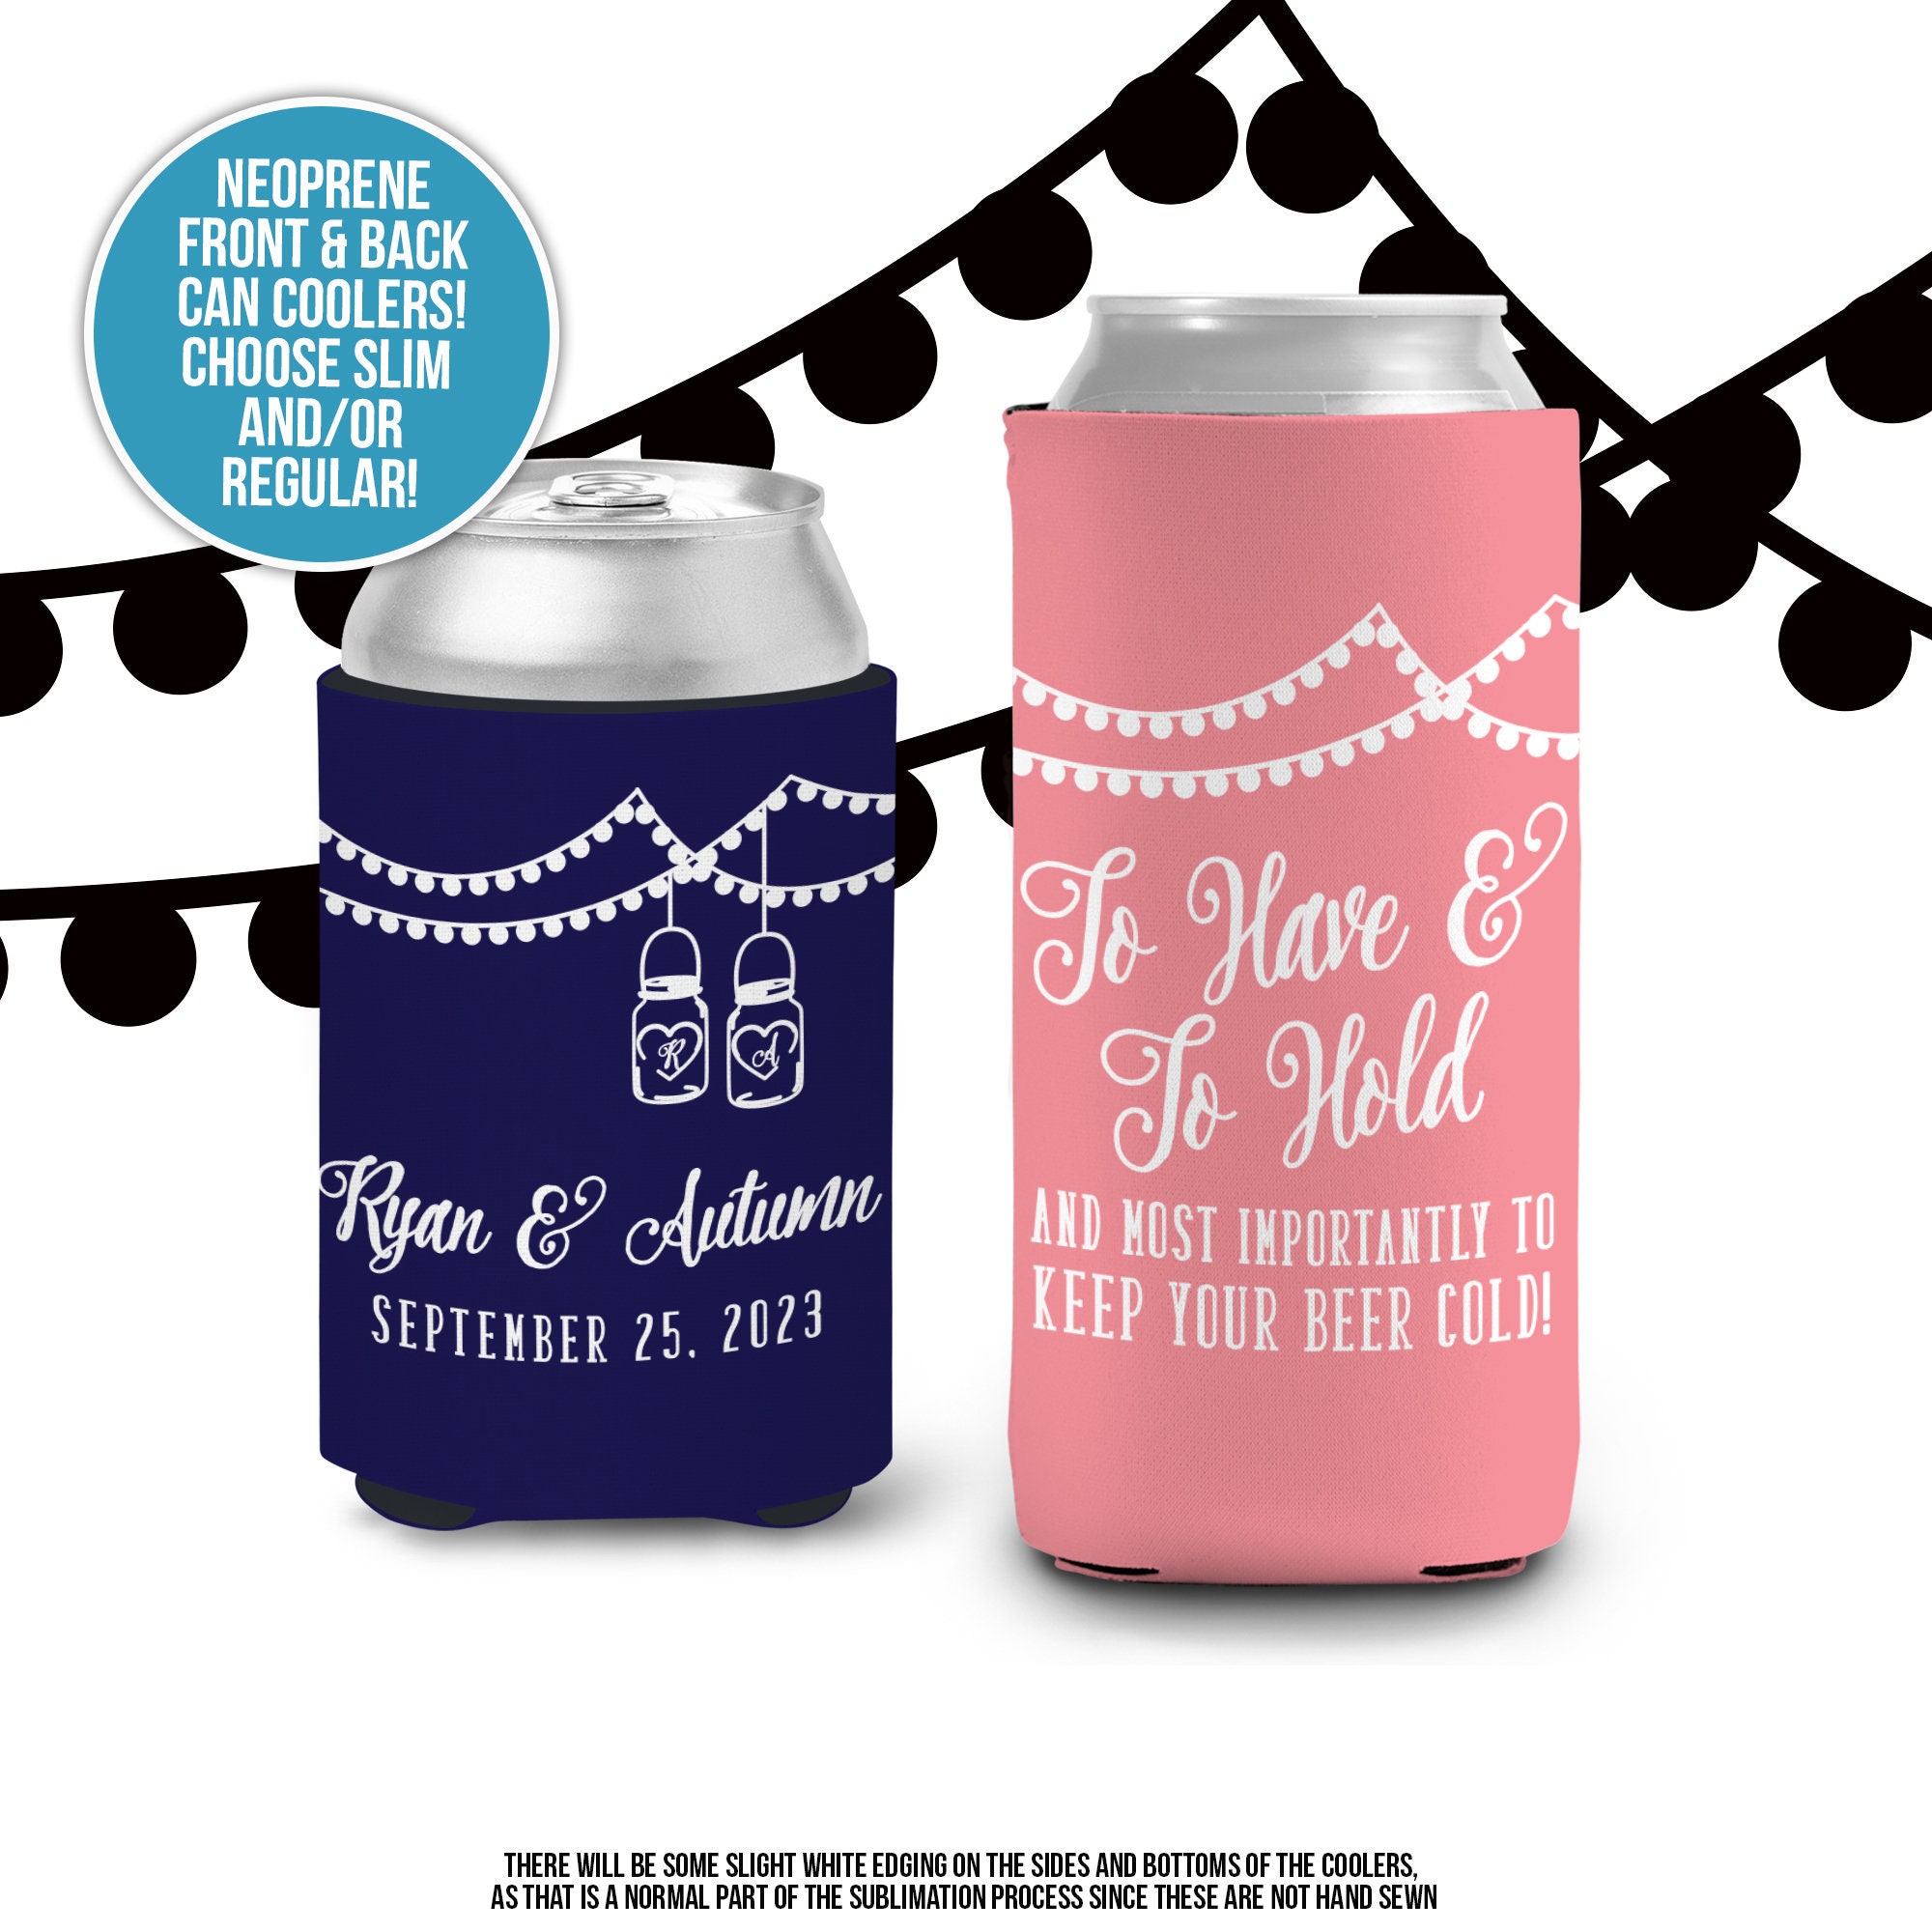 This Koozie Will Keep Your Beer Cold for Hours (and It's on Sale Now)